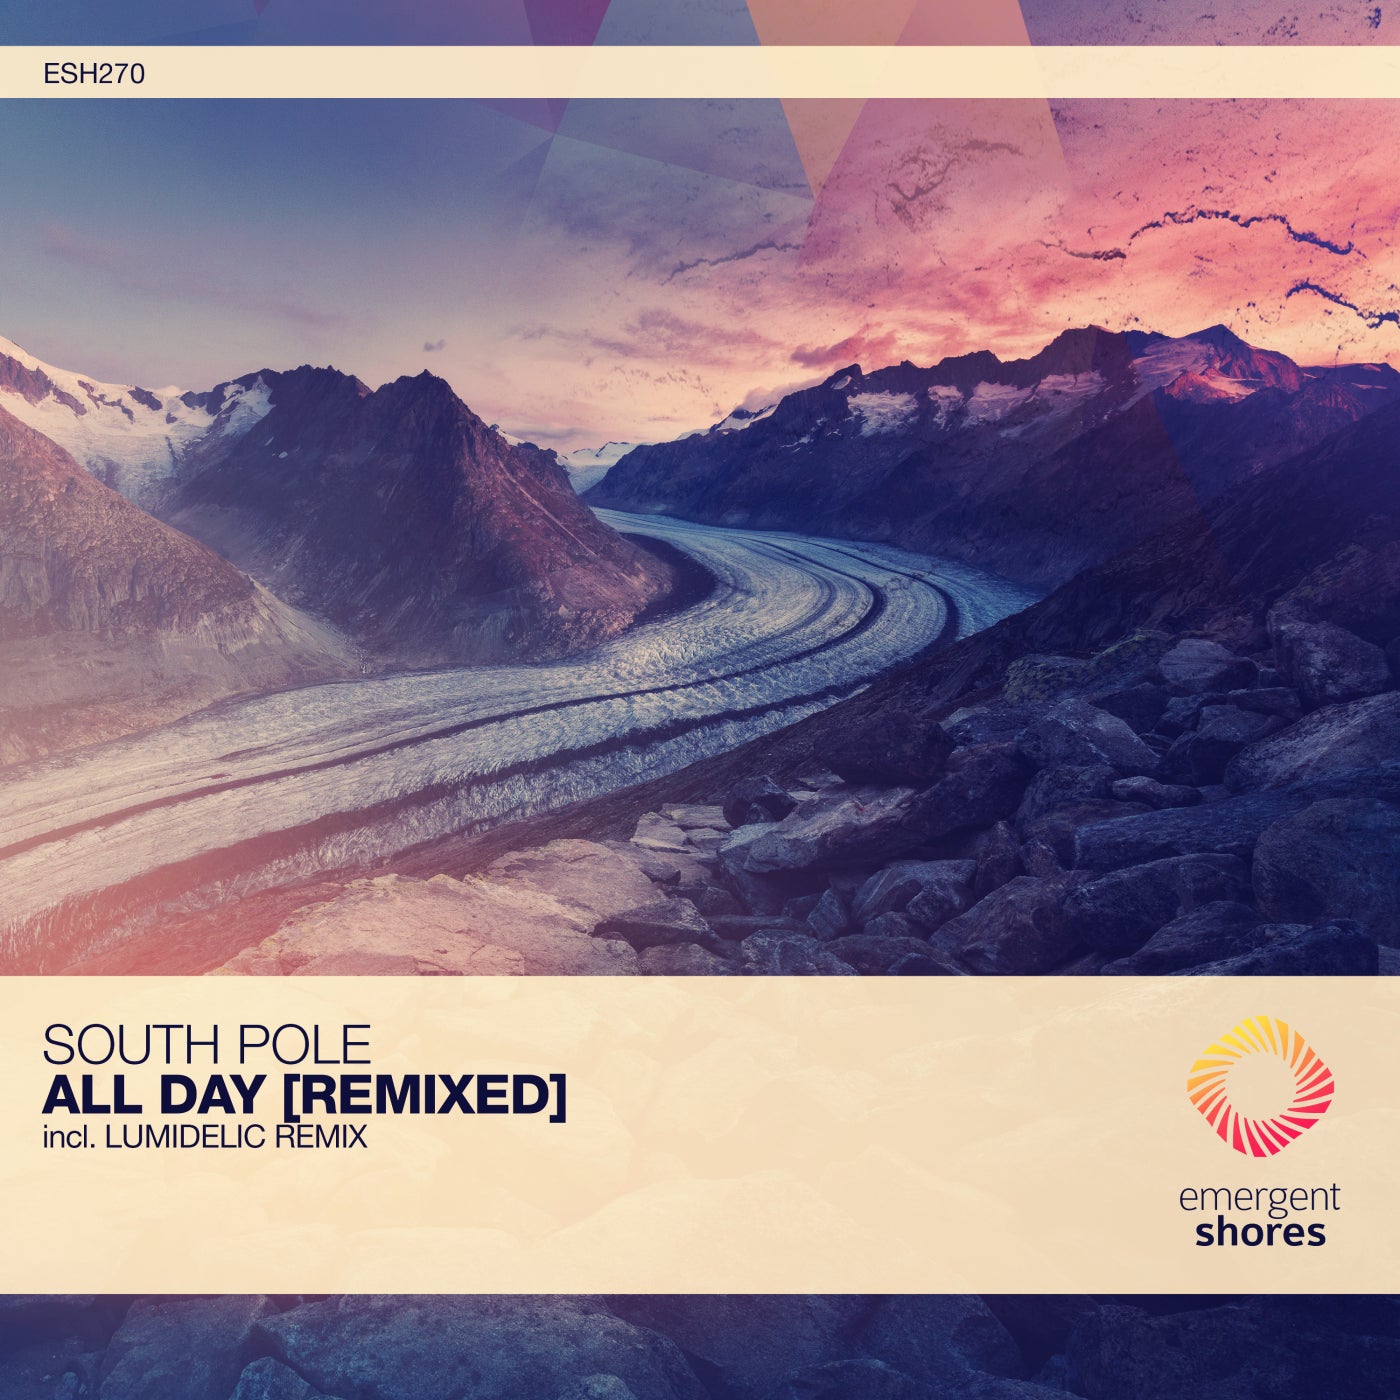 All Day [Remixed]